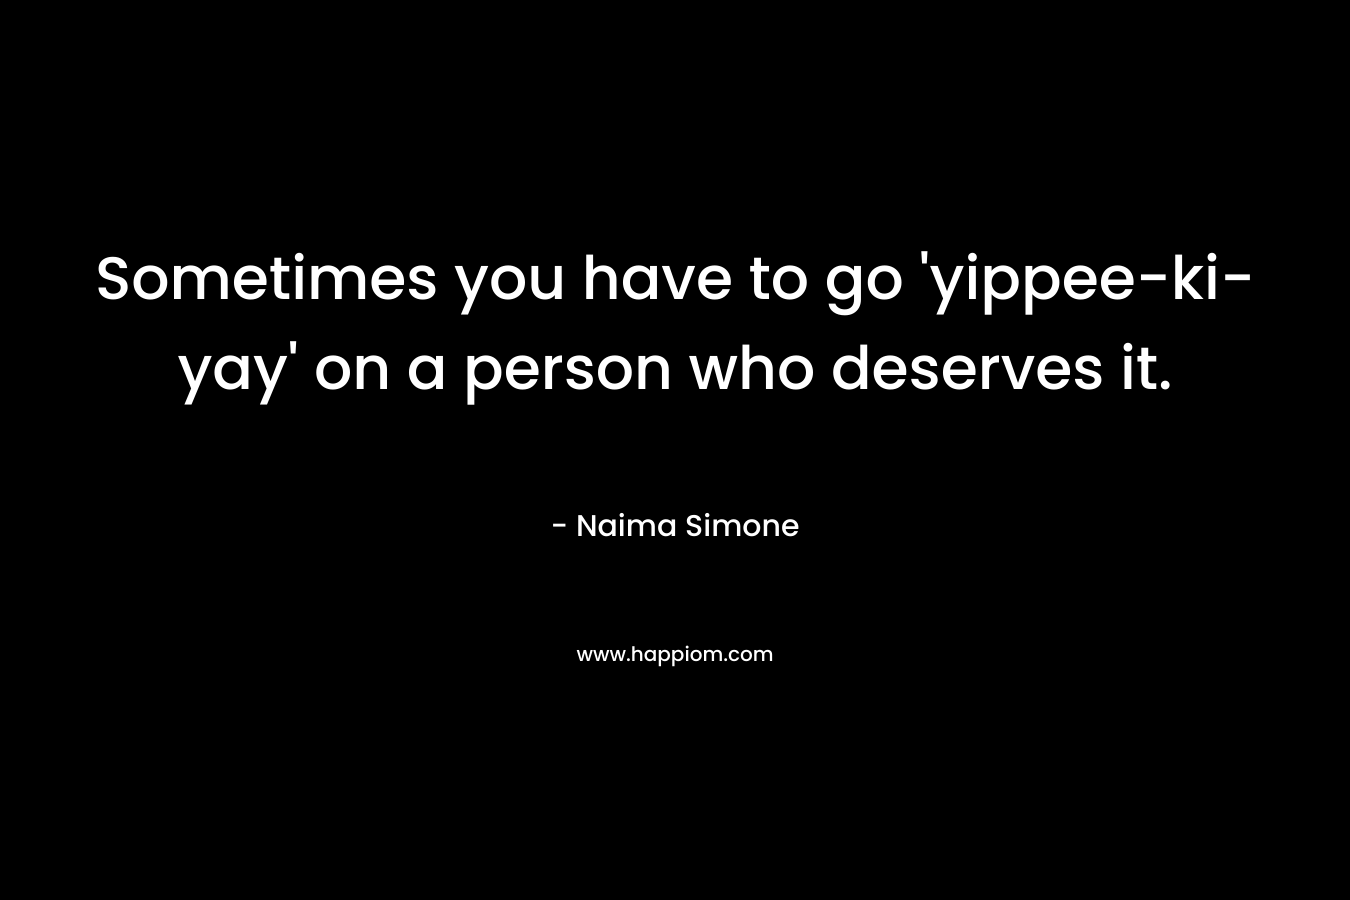 Sometimes you have to go ‘yippee-ki-yay’ on a person who deserves it. – Naima Simone